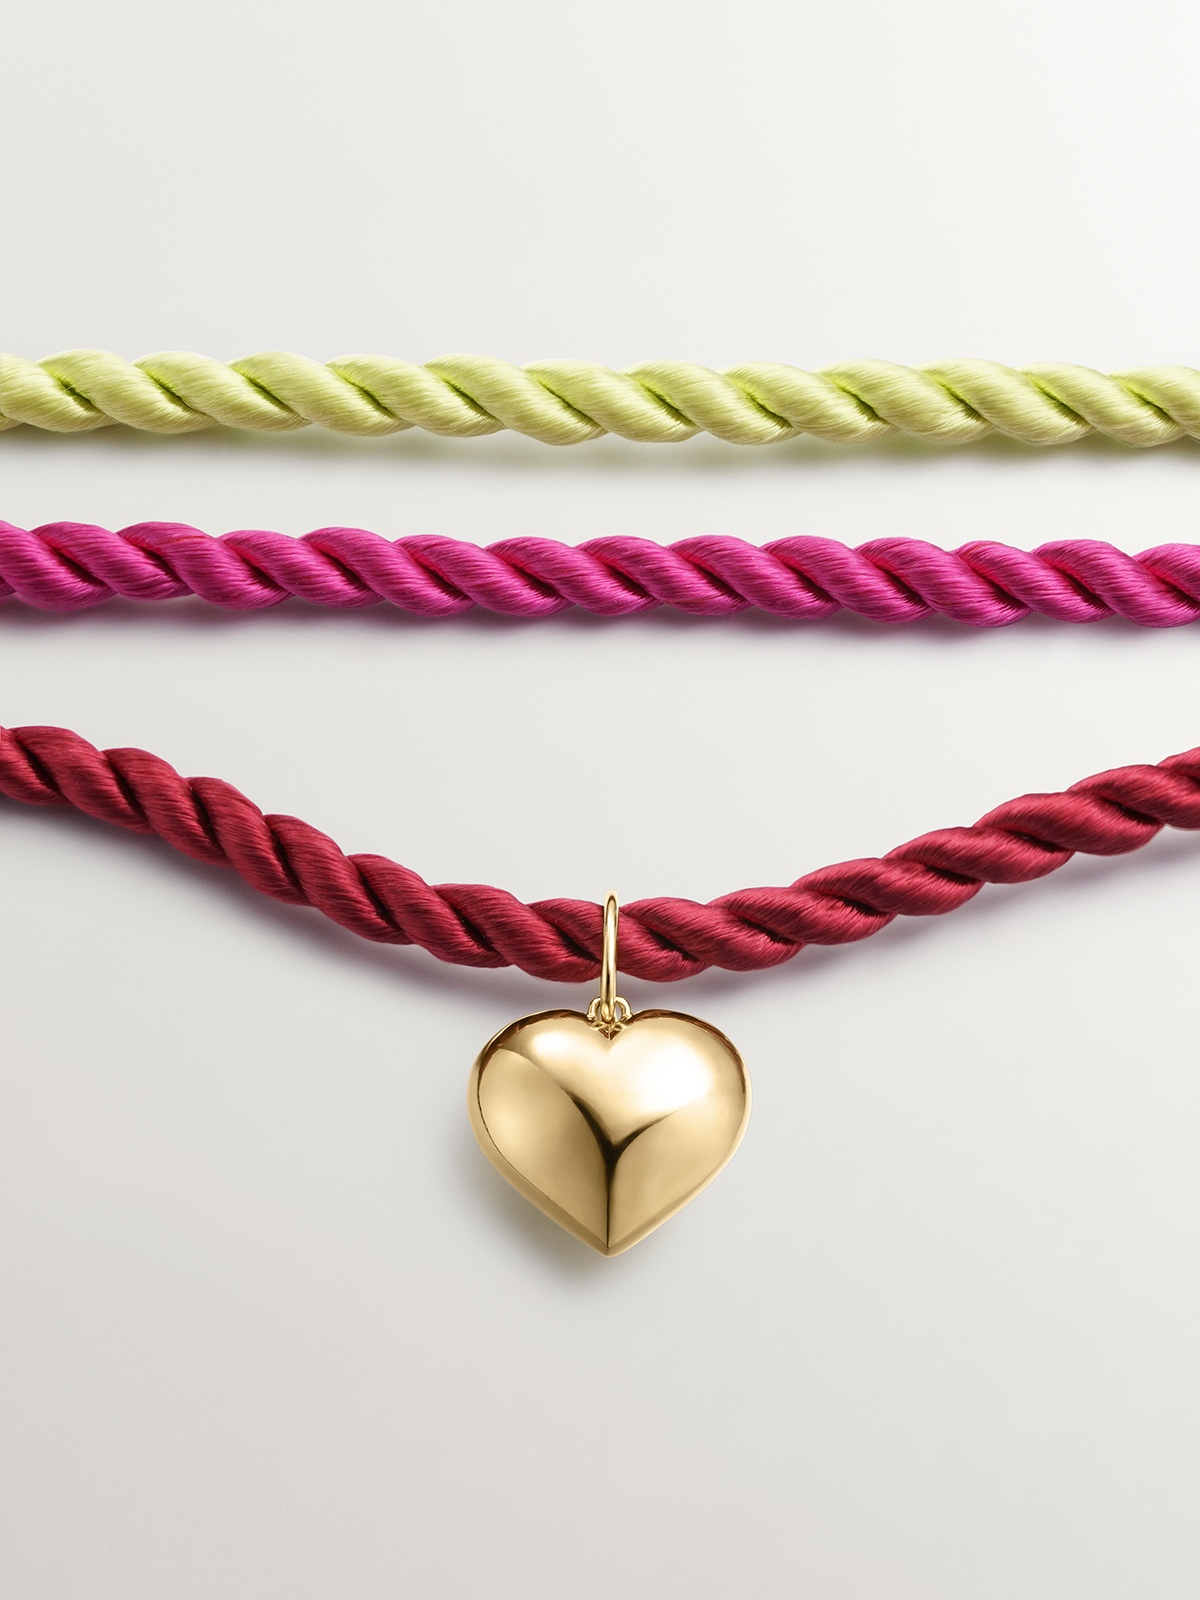 Silk cord necklace with yellow gold-plated silver heart